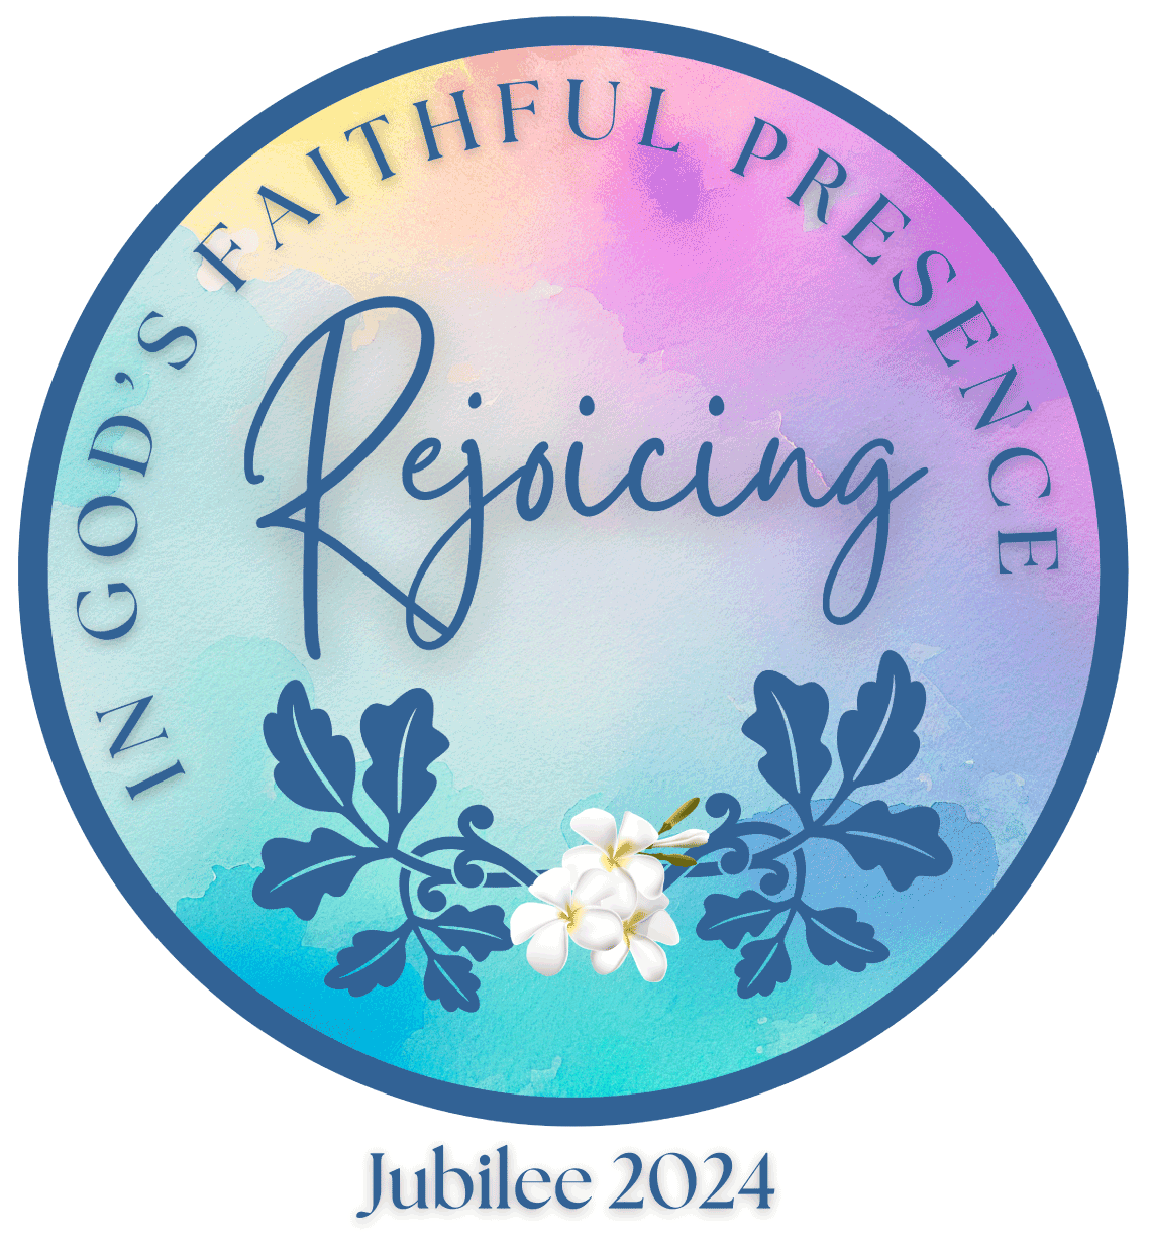 Jubilee 2024 design: Colorful circle image stating, "Rejoicing in God's faithful presence"